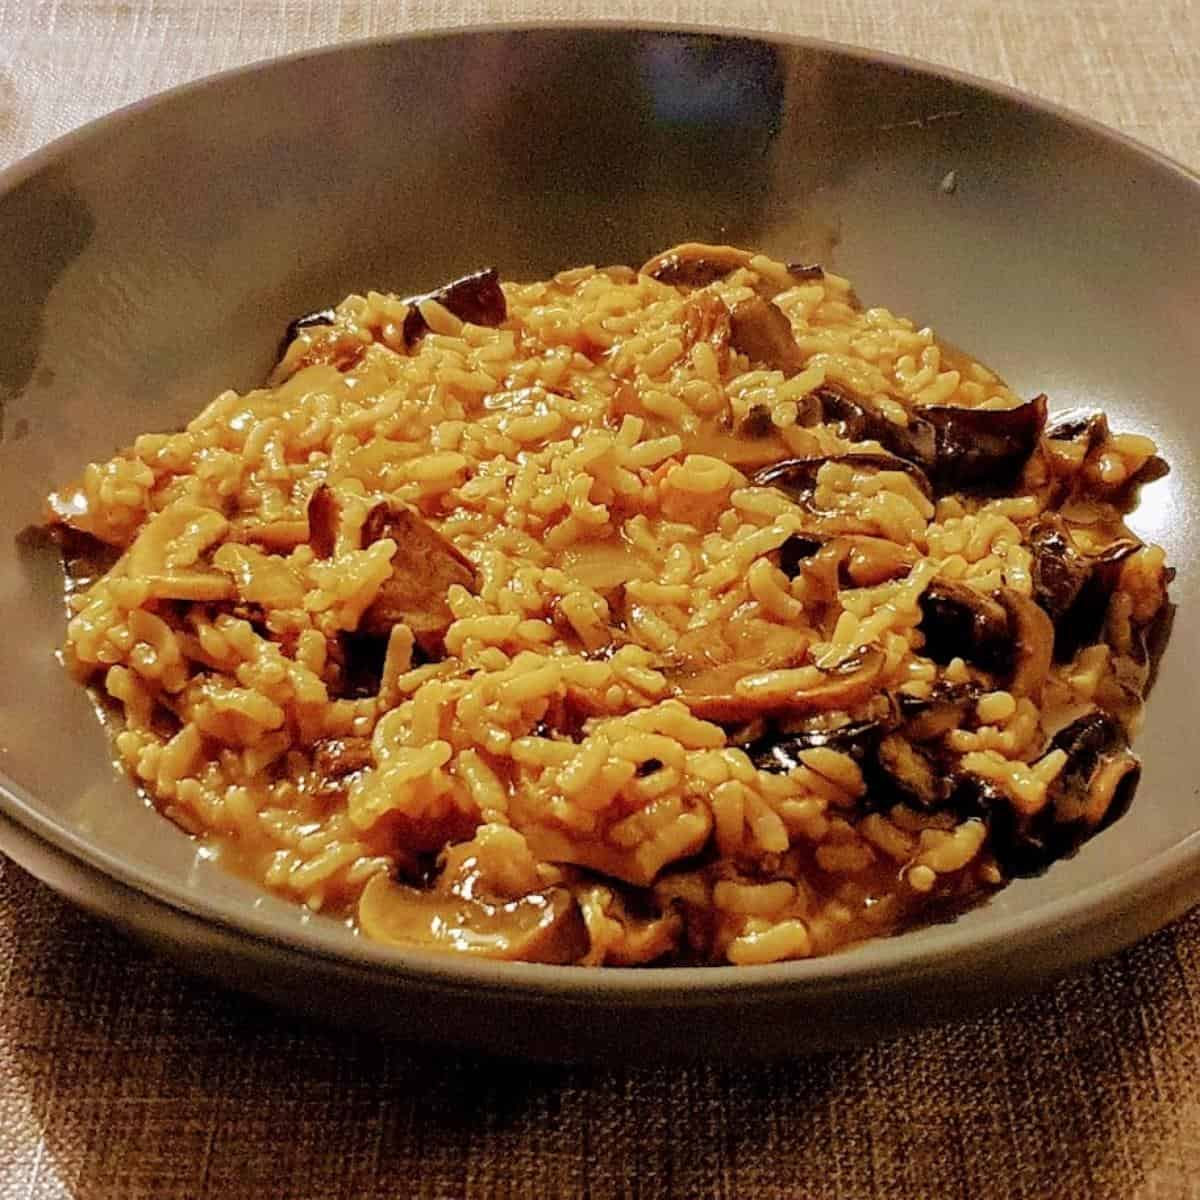 A bowl of food on a plate, with Mushroom and Risotto